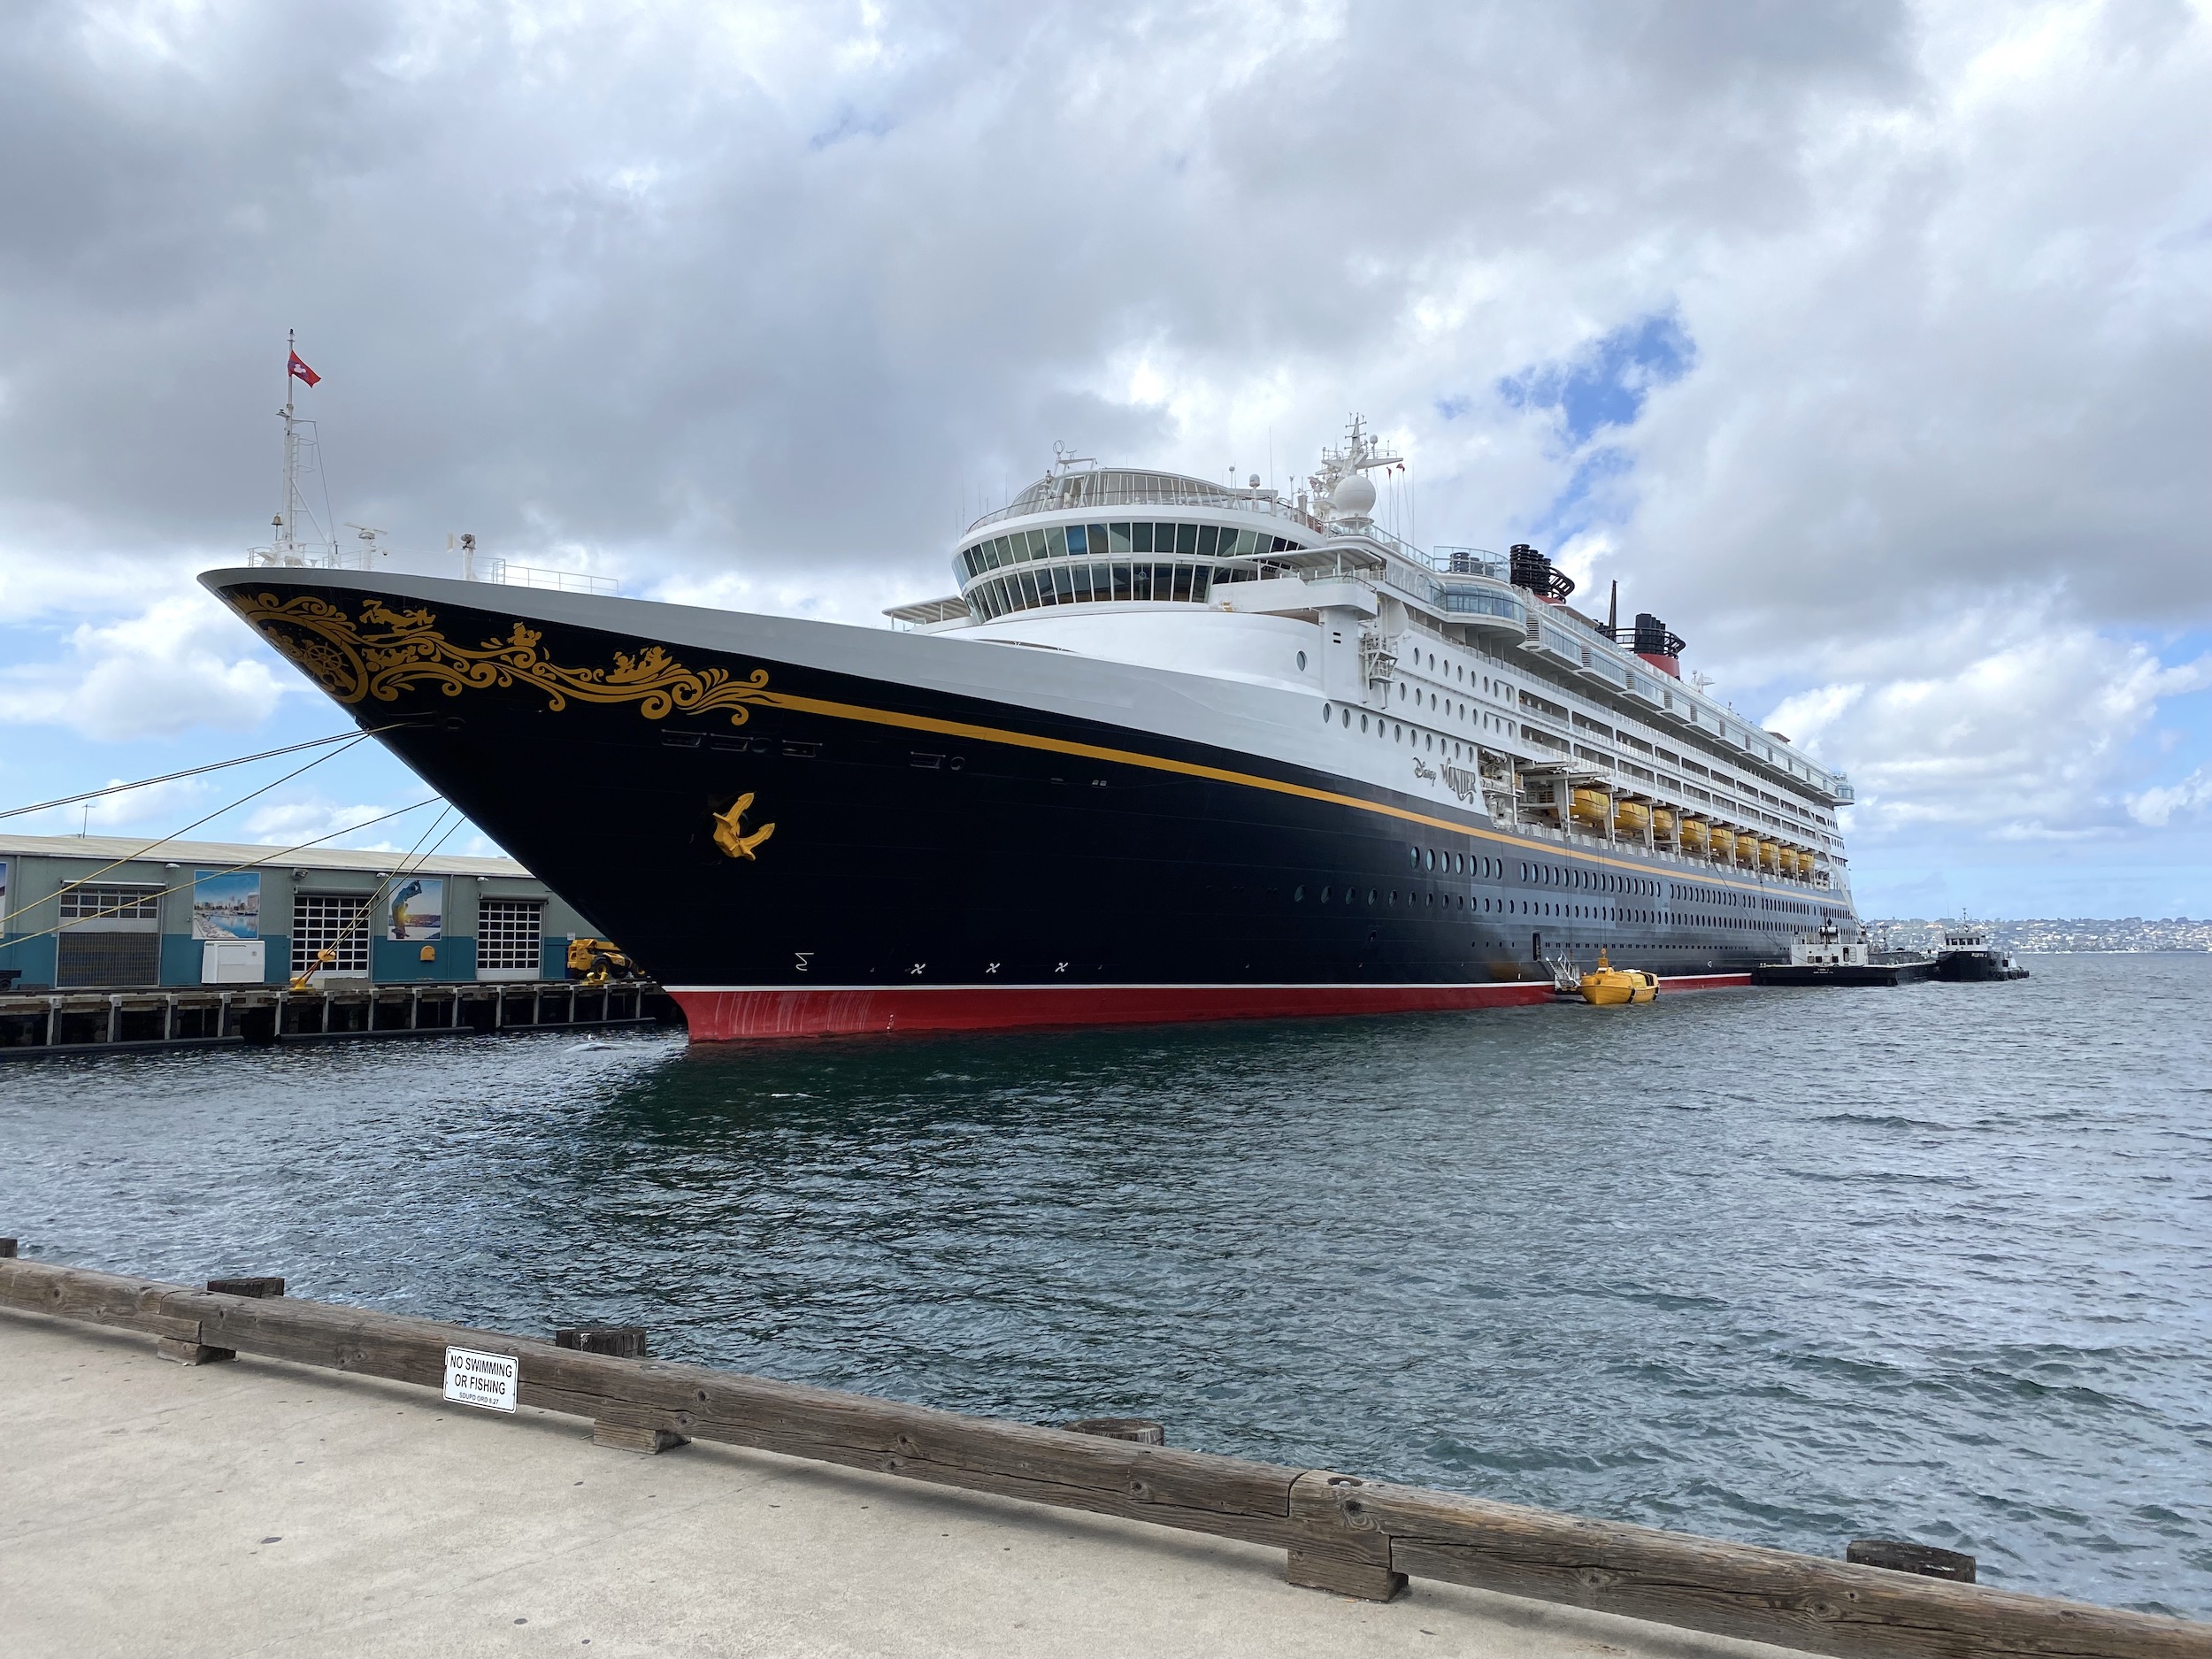 Guest Trip Report October 18, 2021 4 Night on the Disney Wonder from